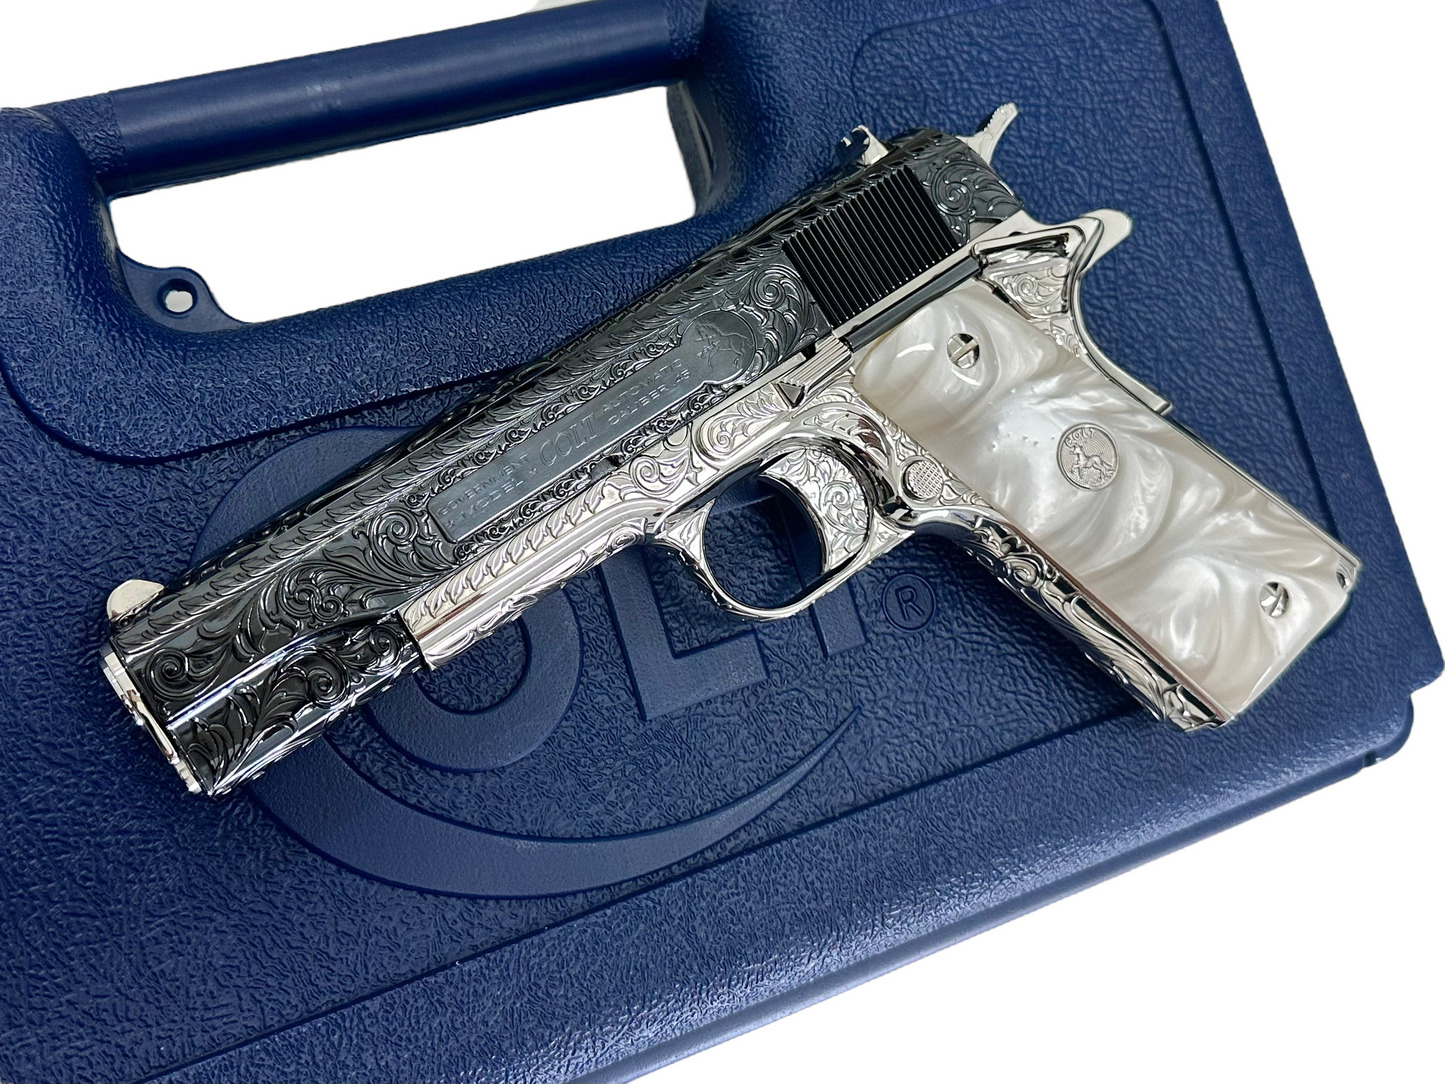 COLT CUSTOM 1911 FULLY ENGRAVED POLISHED AND 2 TONE NICKEL PLATED WITH ROYAL BLUE SLIDE